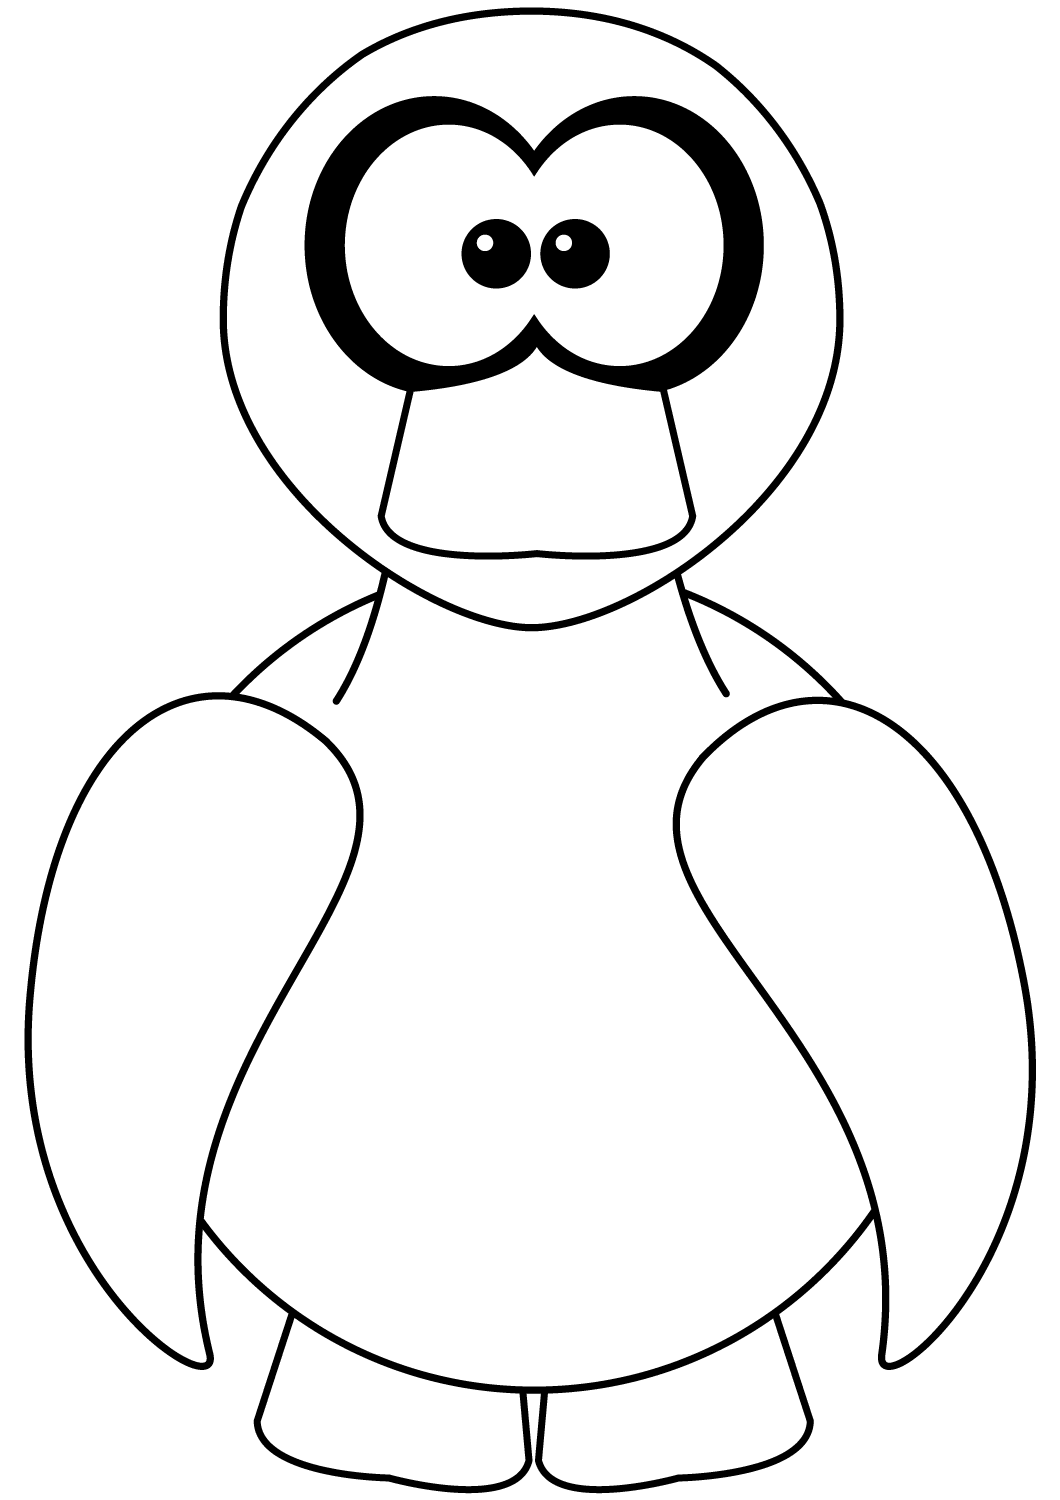 Funny Canard duck has black round eyes Coloring Page